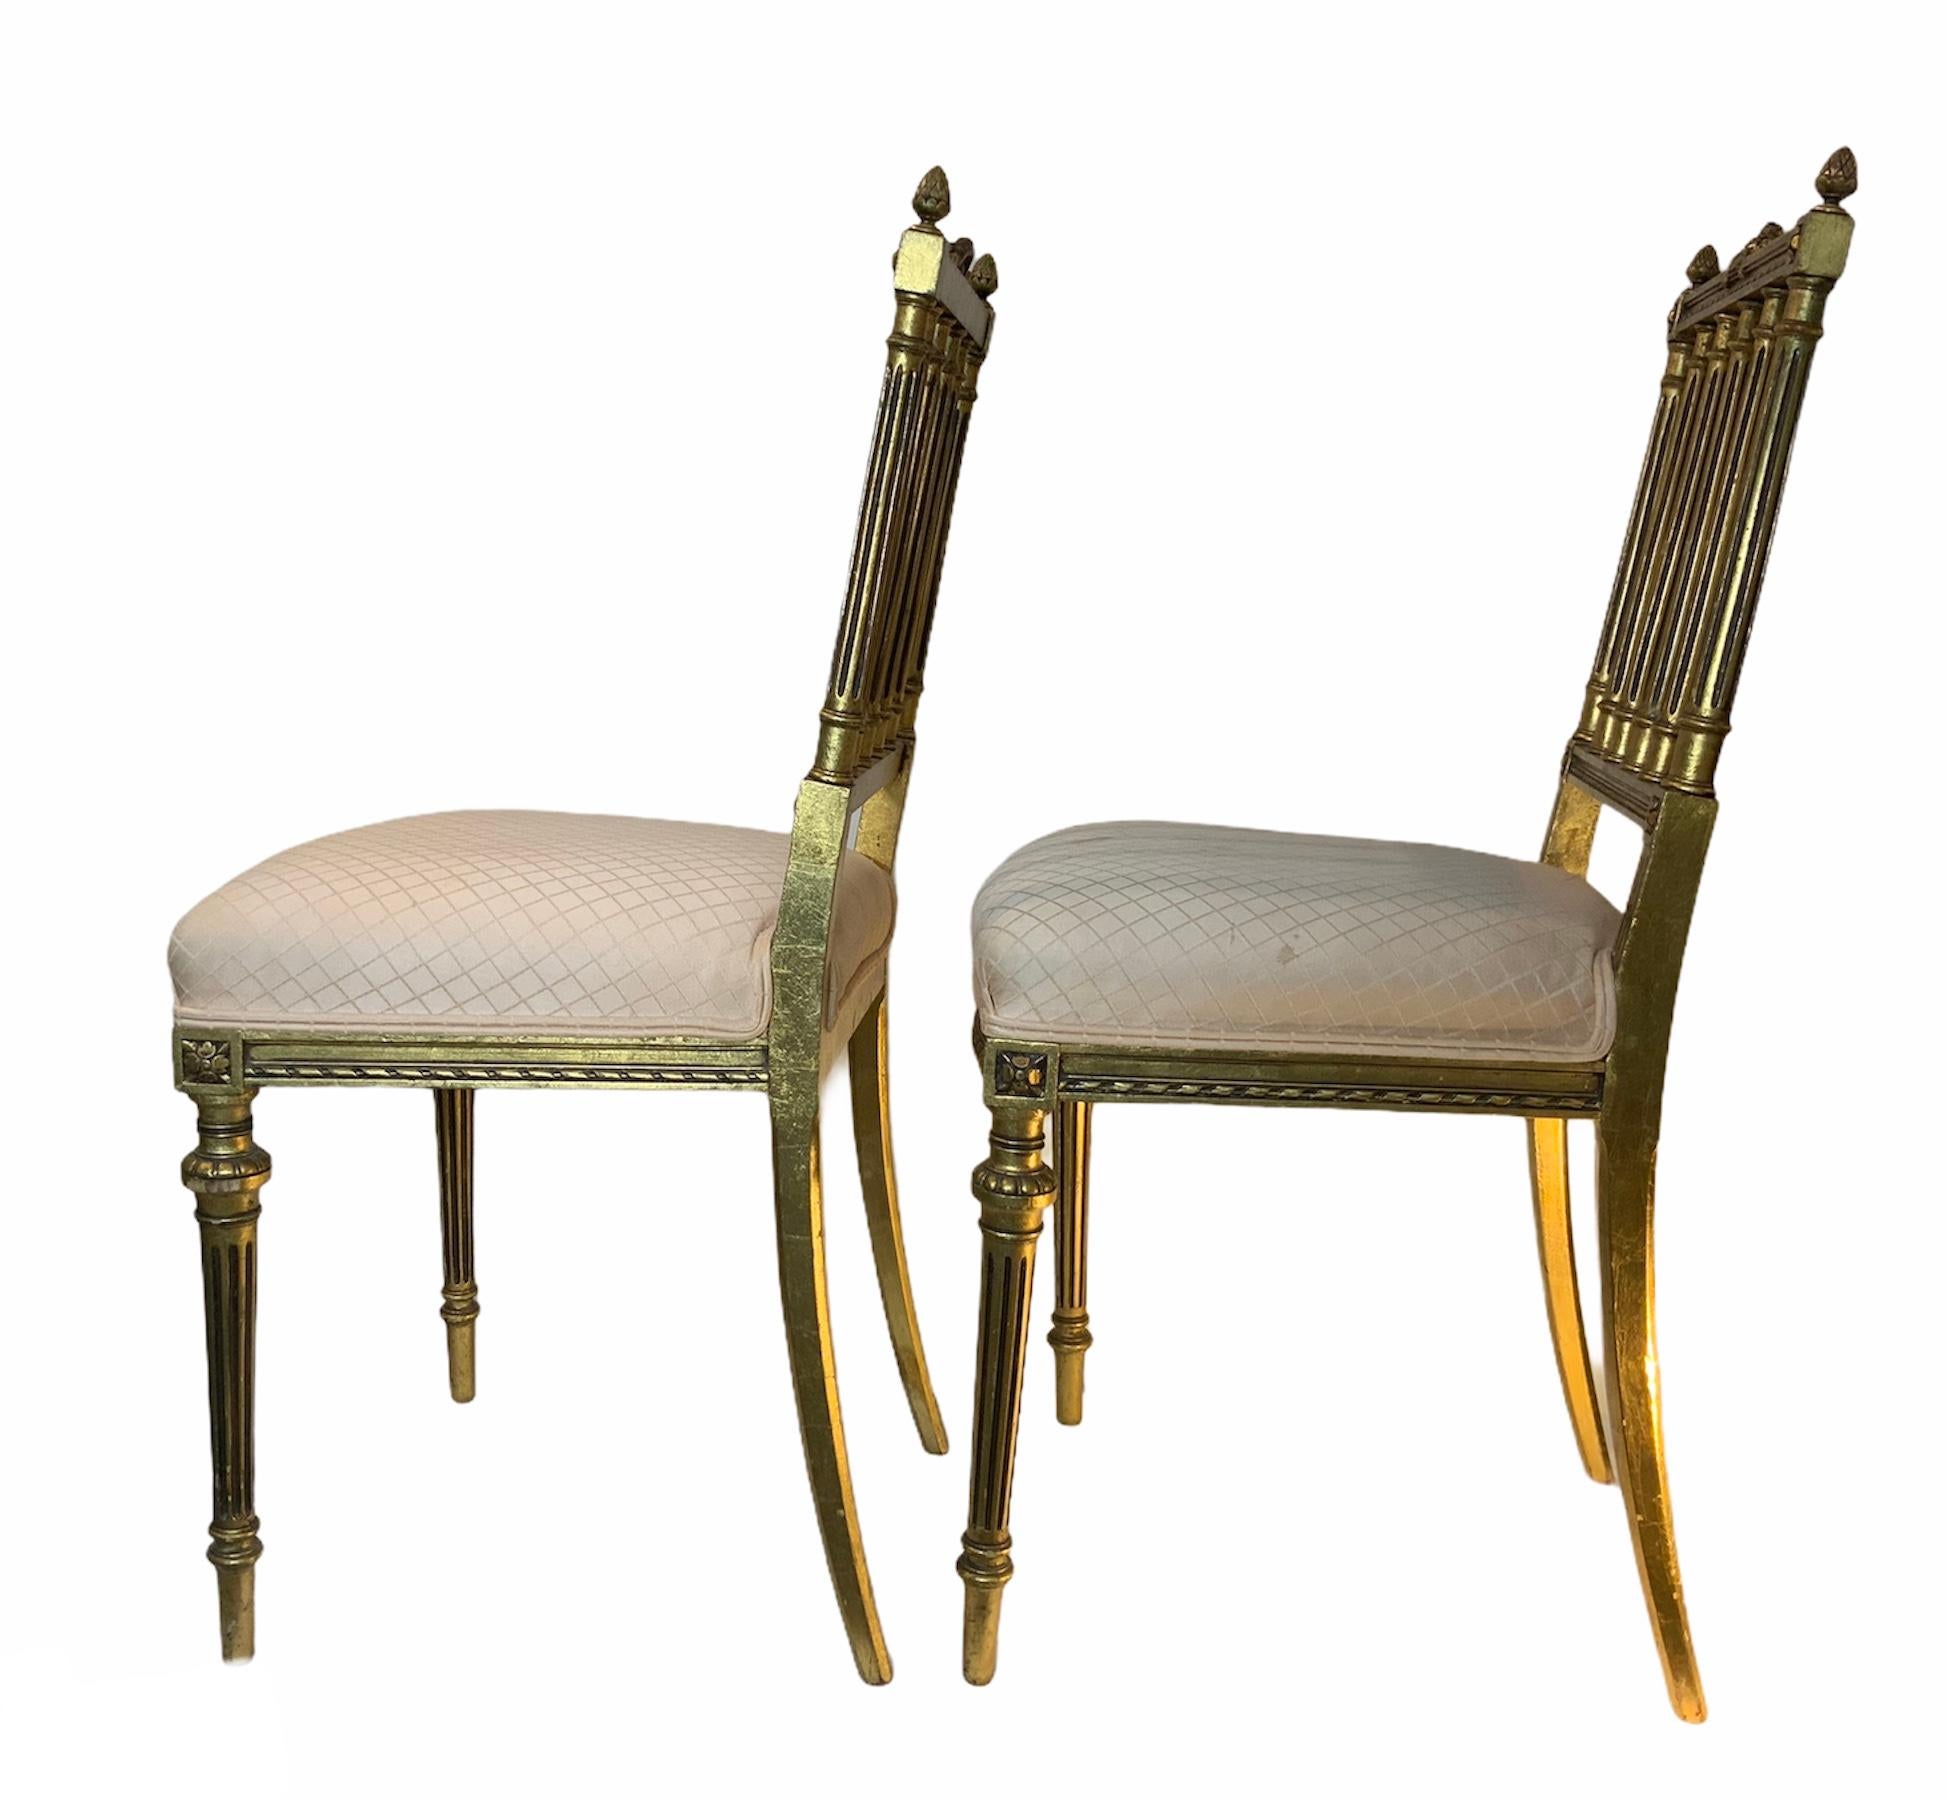 Hand-Carved Sheraton Style Pair of Gilt Wood Parlor Chairs